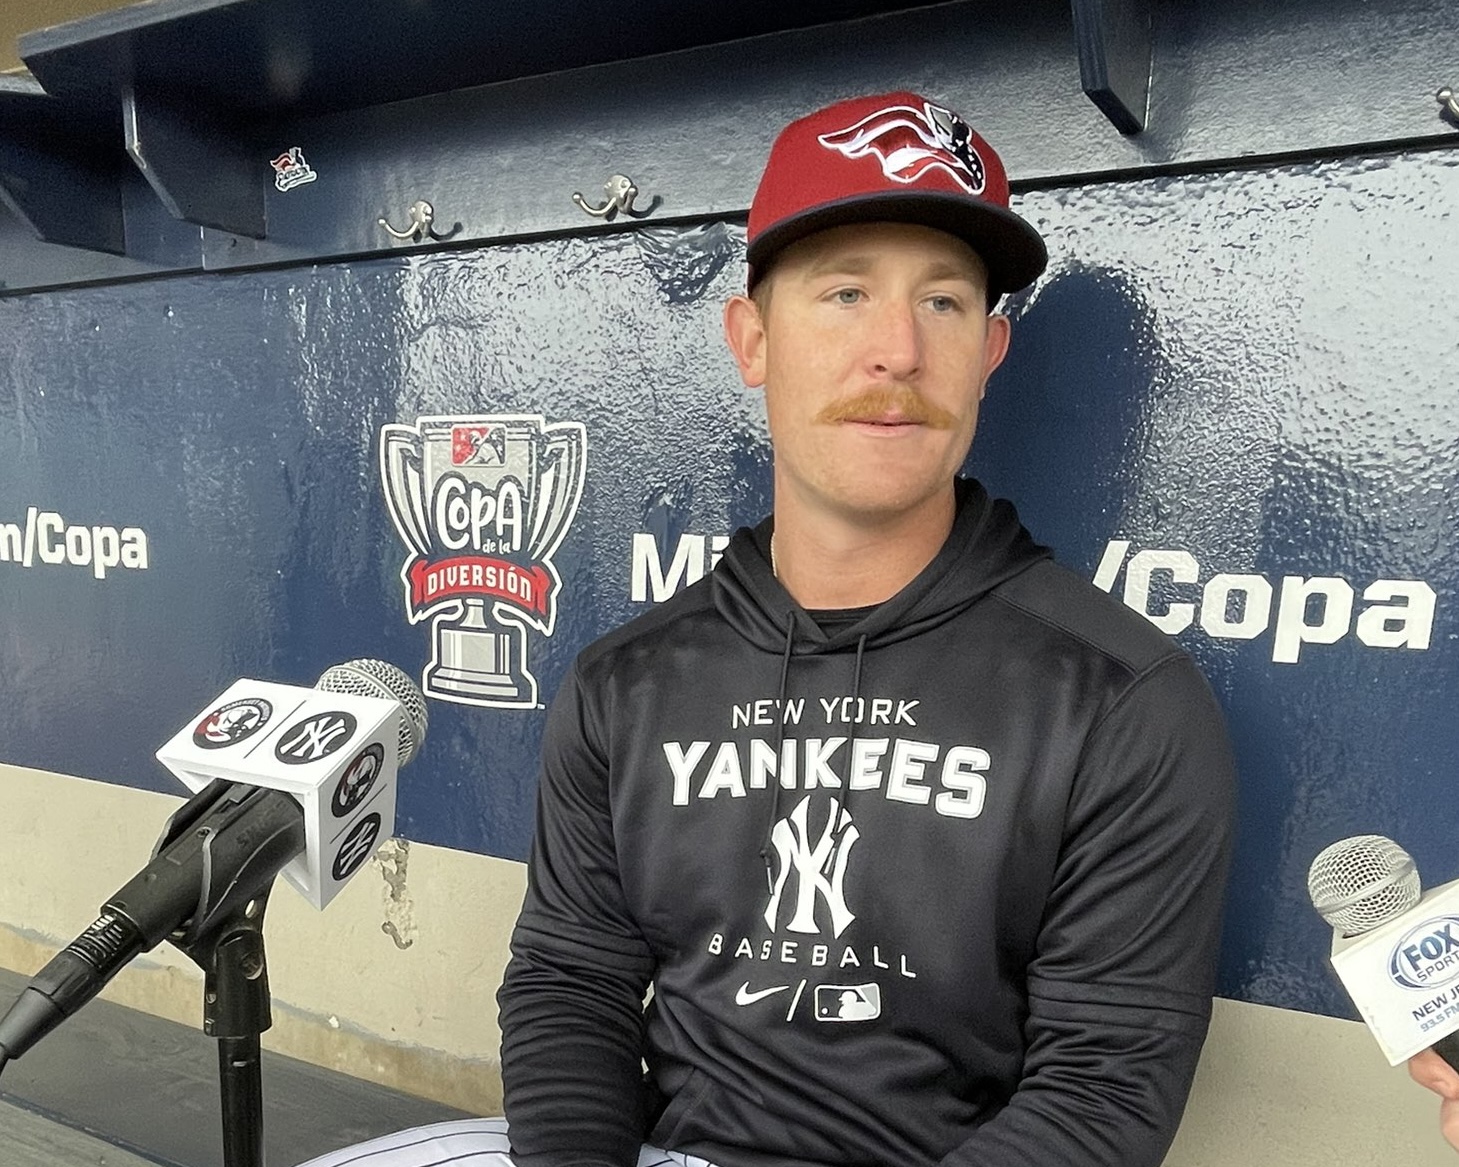 DJ LeMahieu connecting with Yankees hitting coach Sean Casey